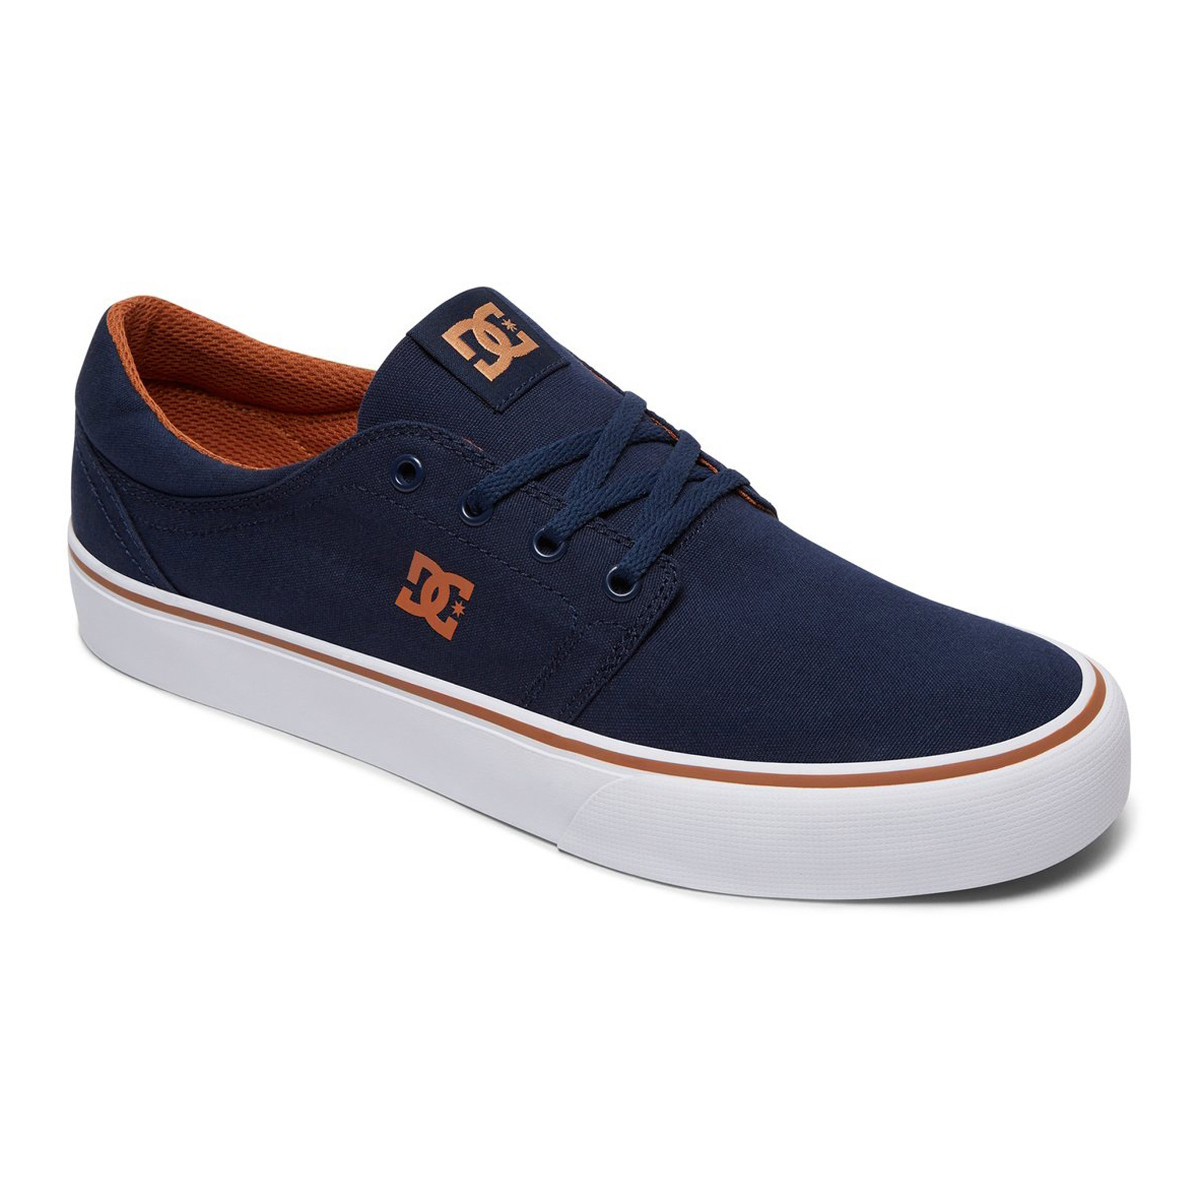 DC Shoes Trase TX Navy/Camel